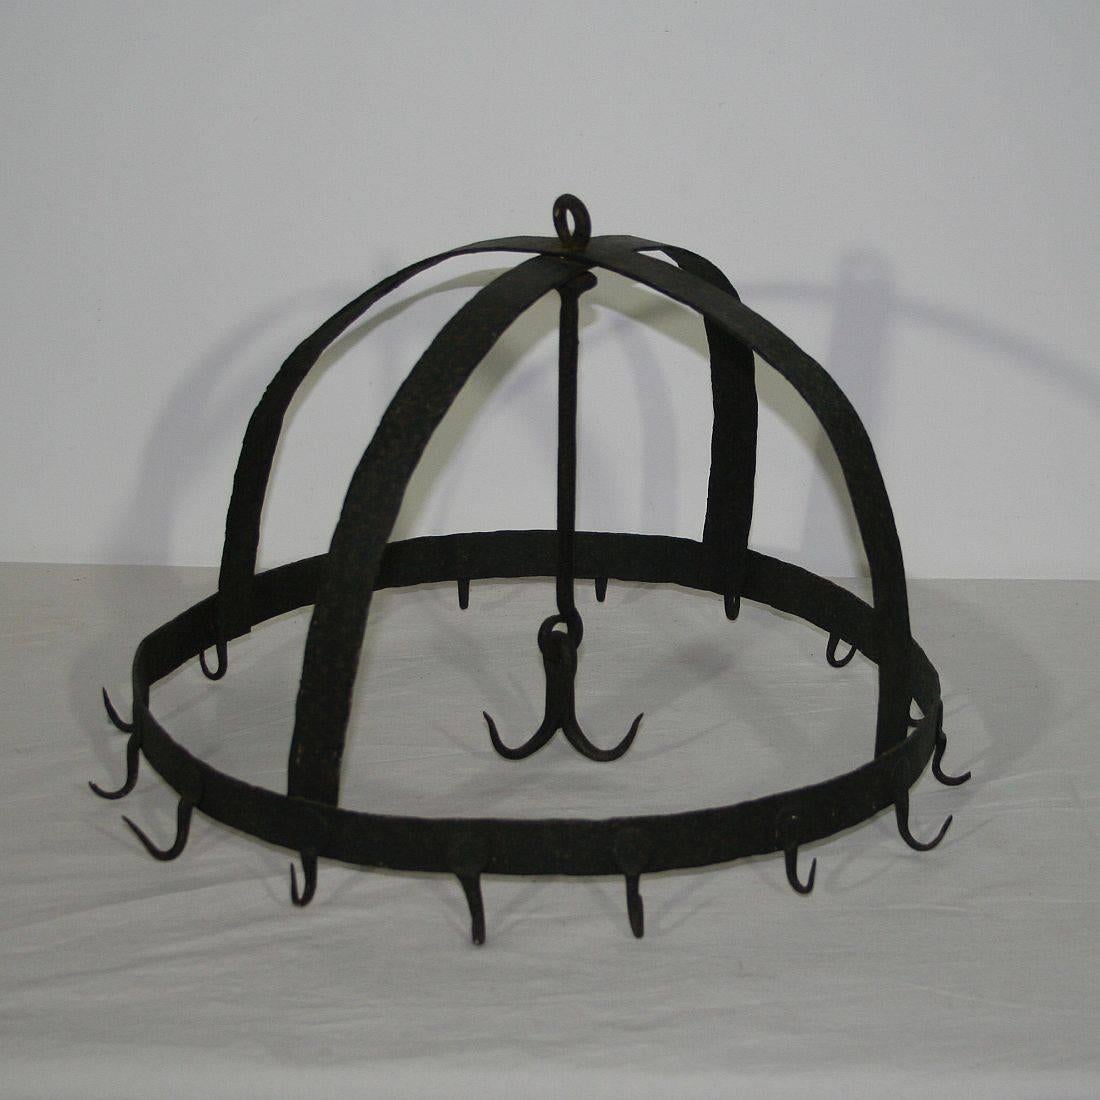 Large hand-forged iron game rack
France, circa 1650-1800.